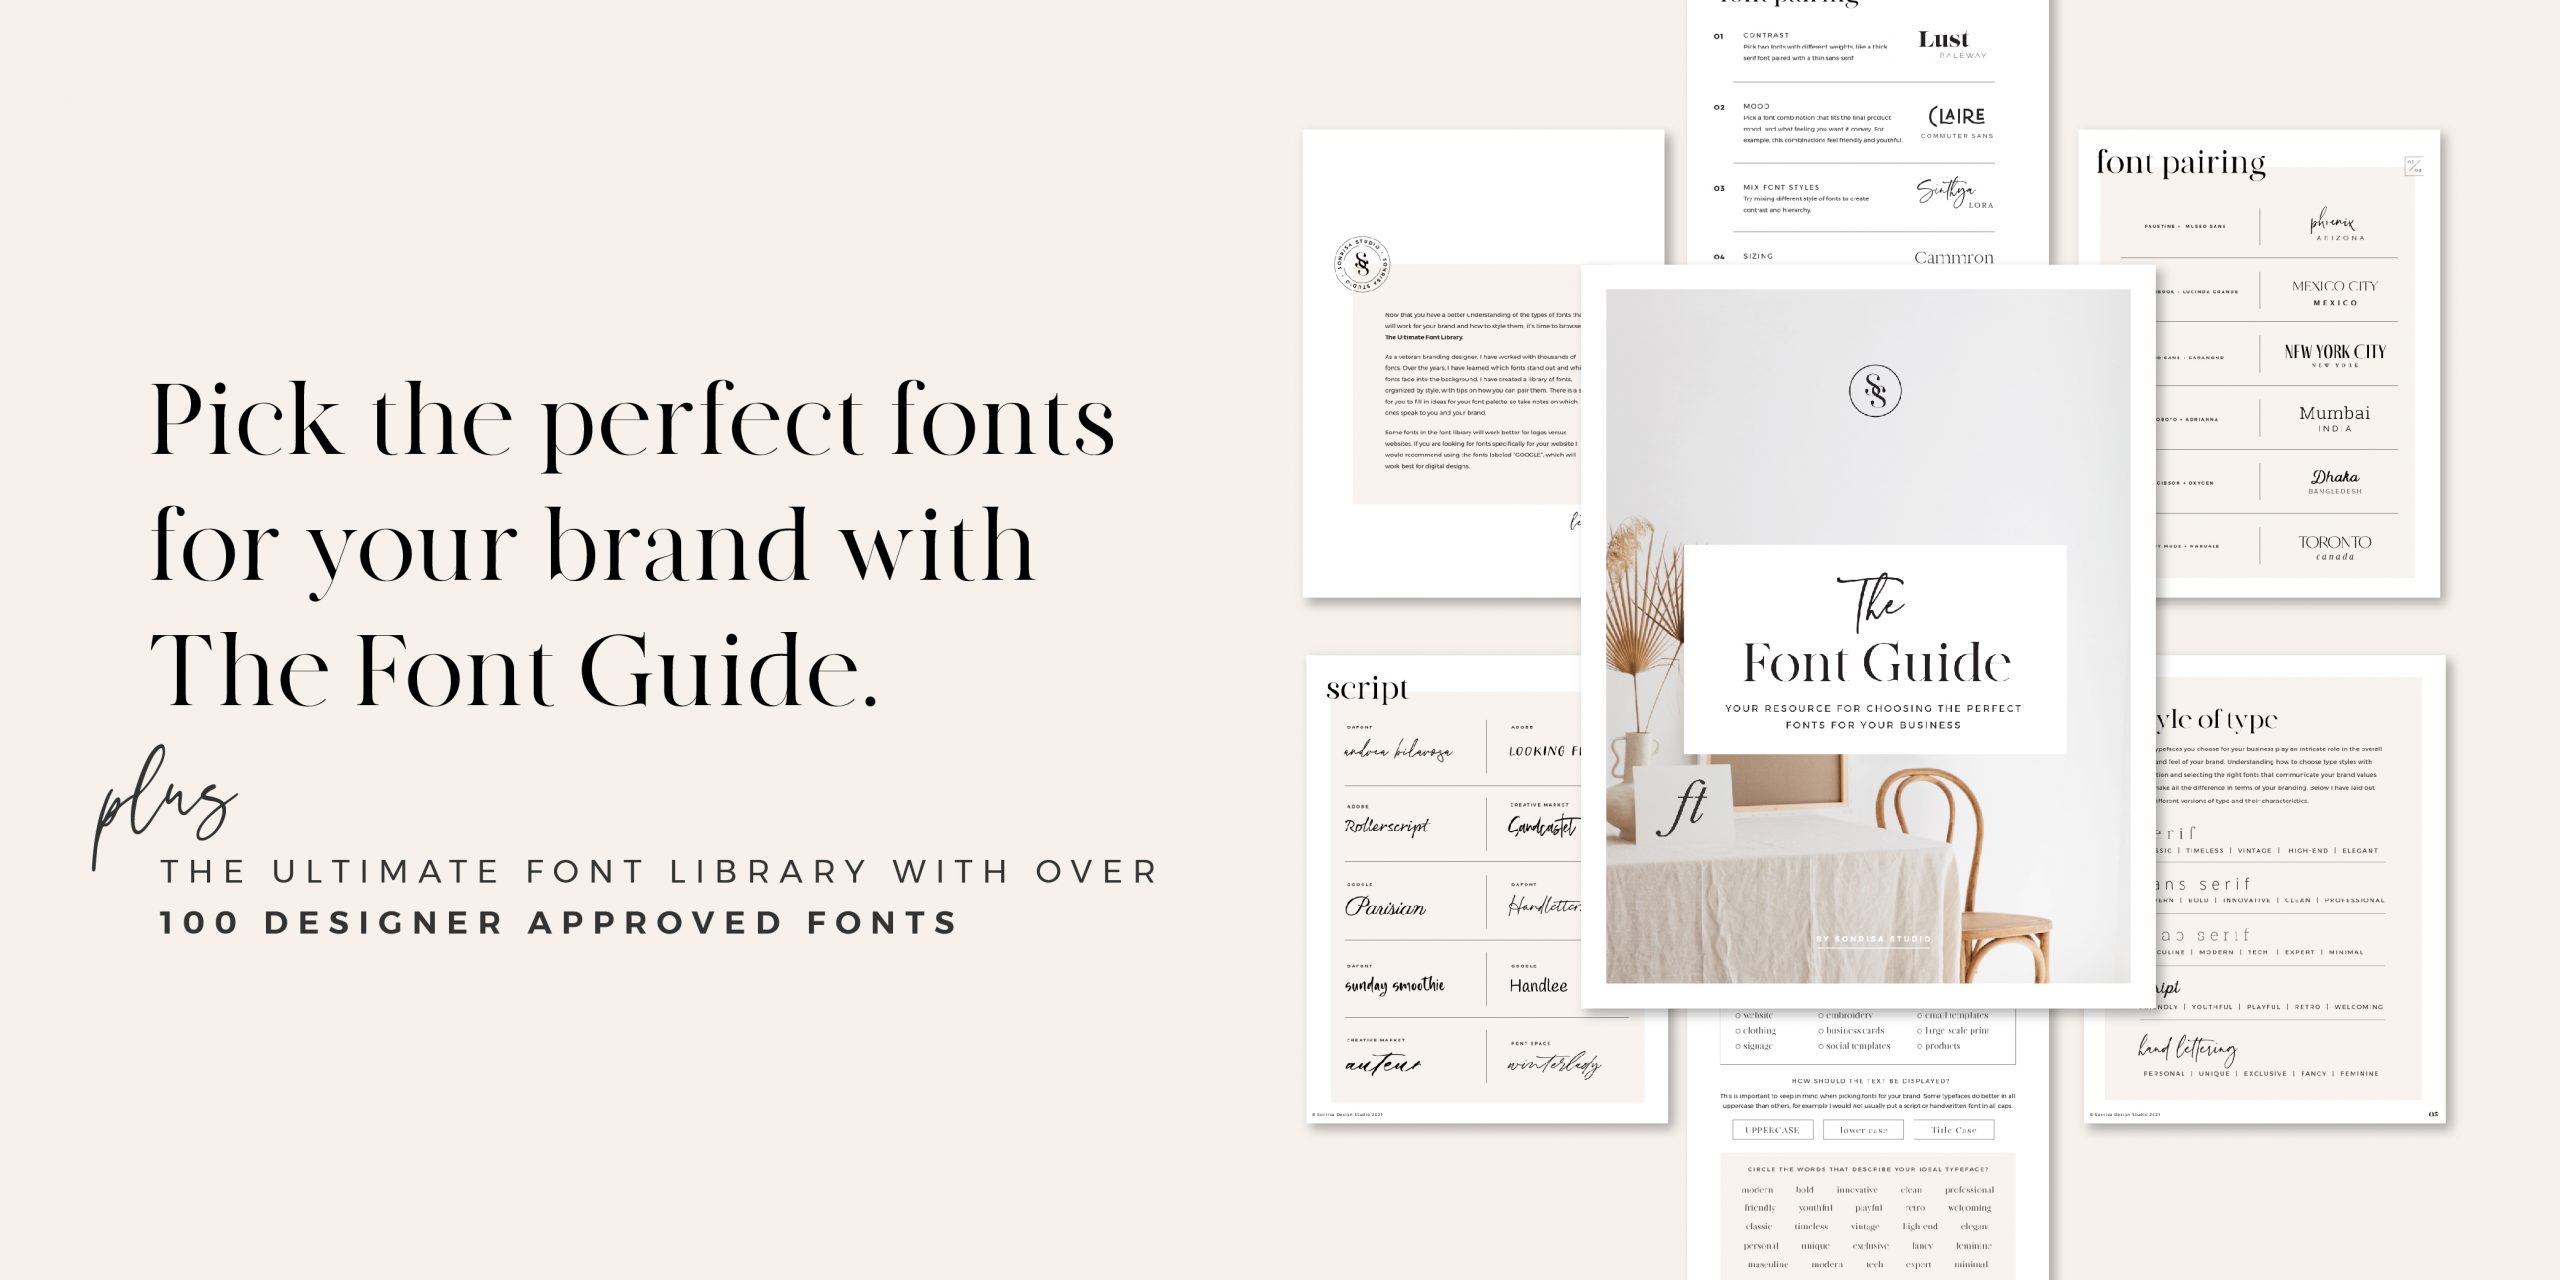 The Font Guide from Sonrisa Studio